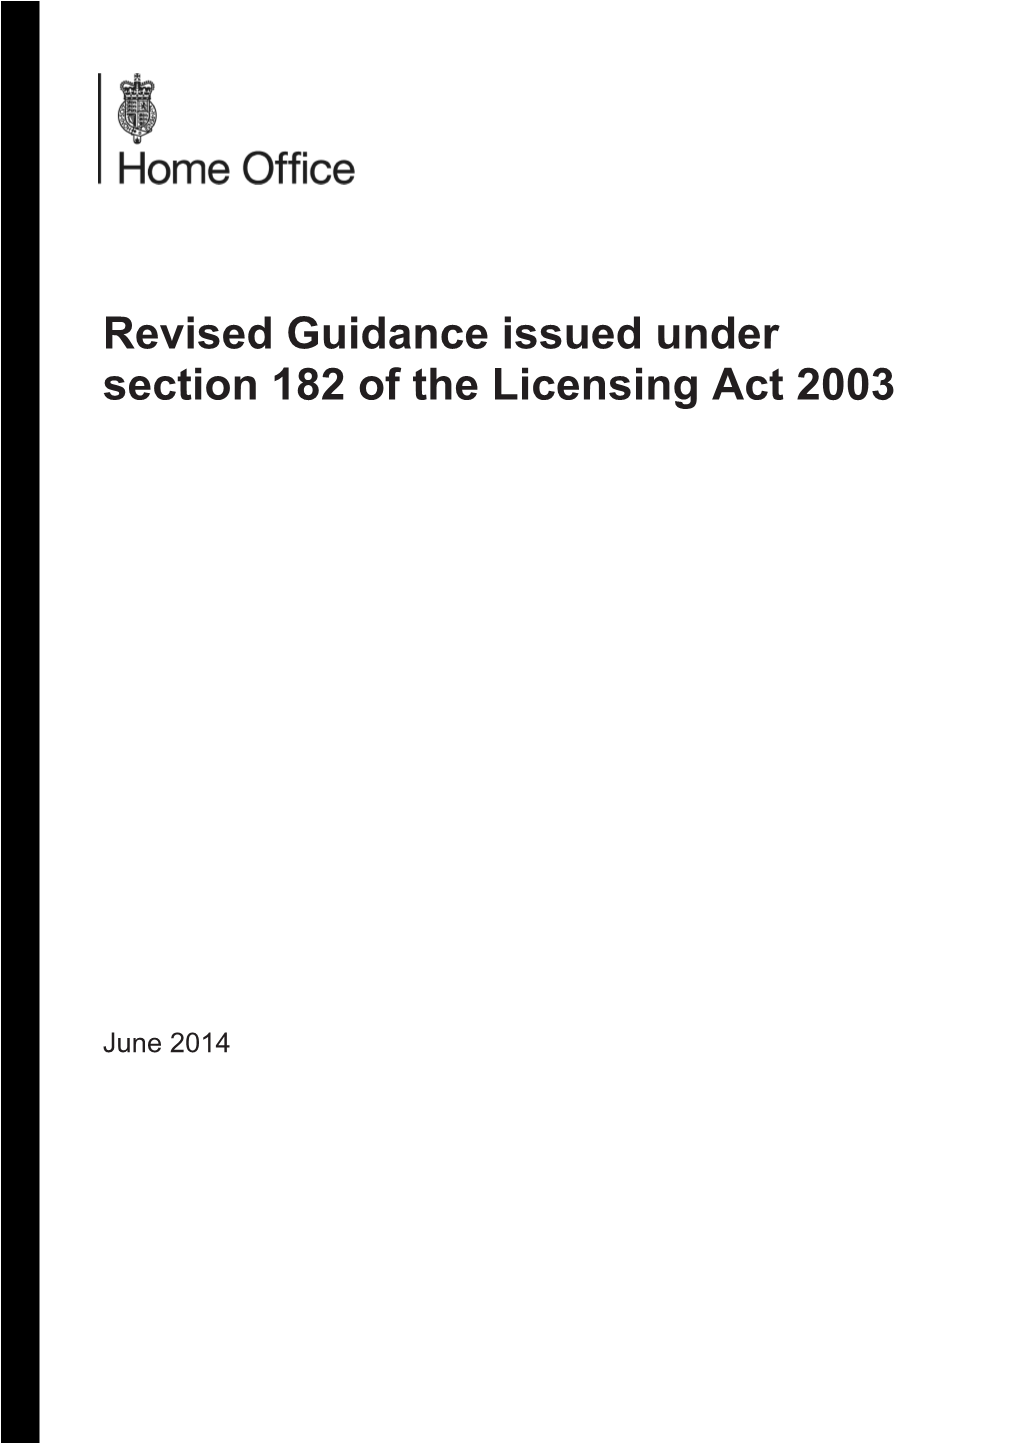 Revised Guidance Issued Under S182 of the Licensing Act 2003